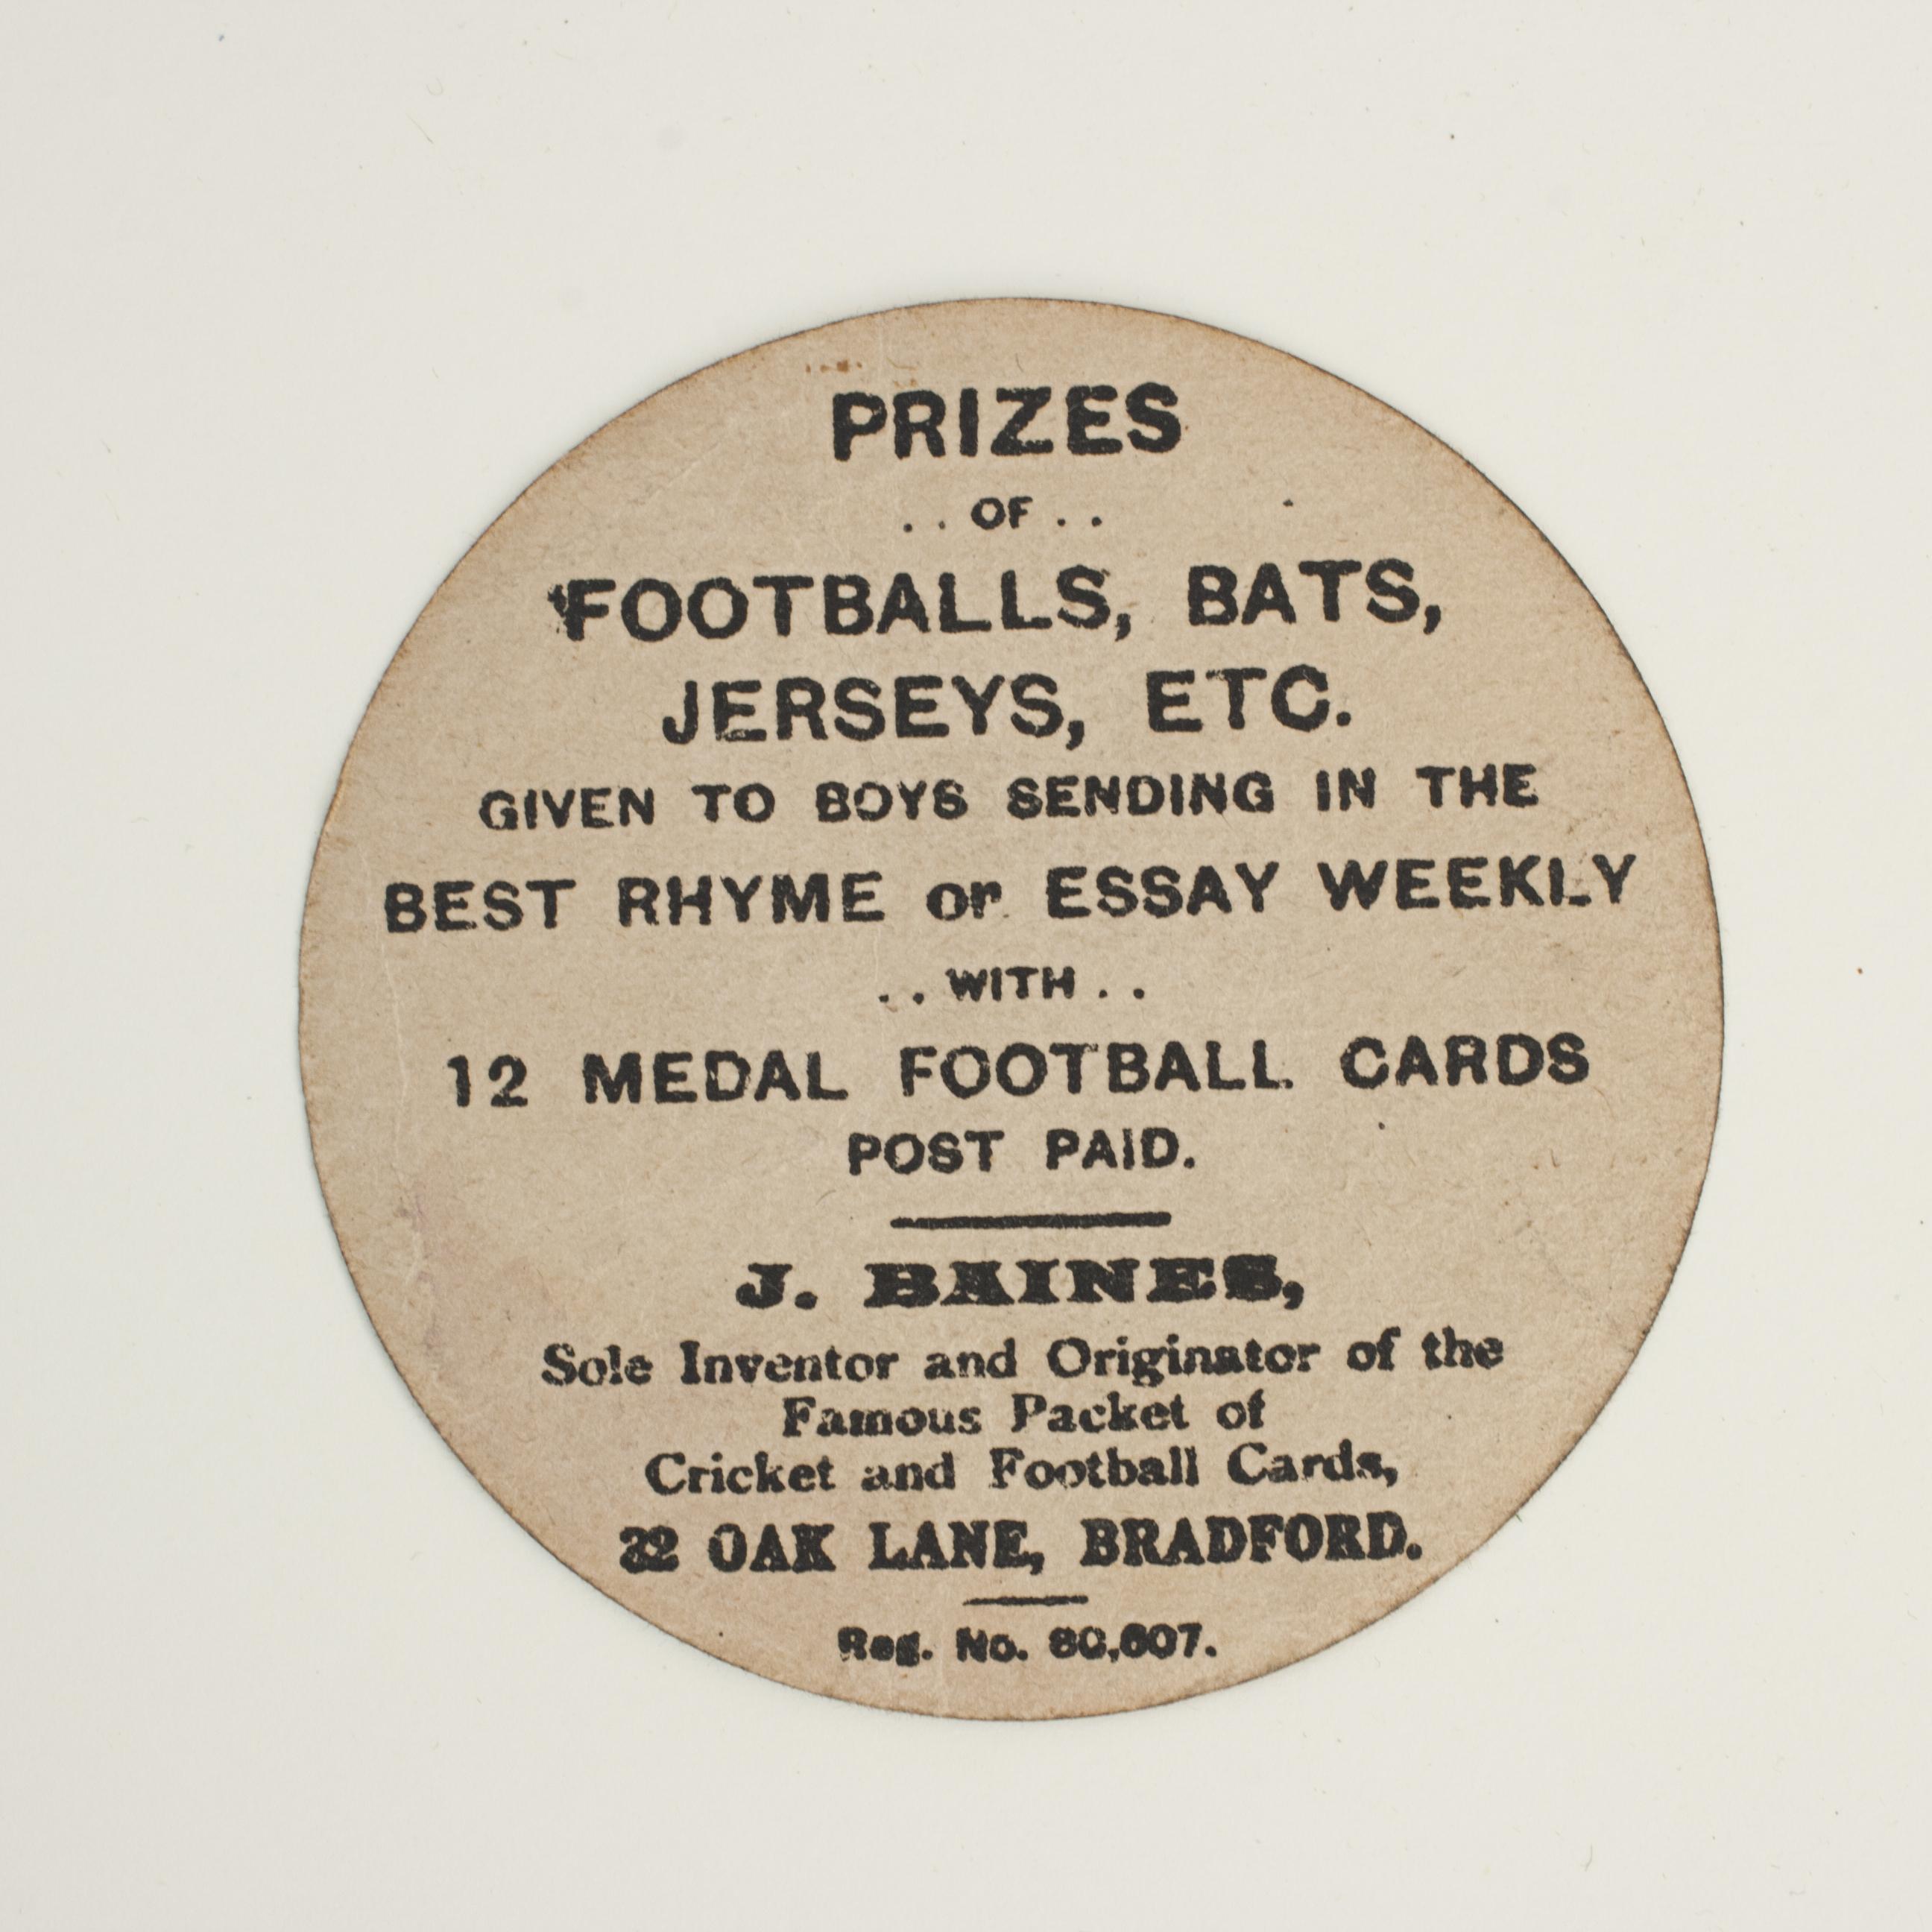 Baines Football trade card, Blackburn Rovers.
A rare circular football trade card in the shape of a leather football ball. Made by the toy shop owner from Bradford, John Baines. Baines went on to produce not only football cards but eventually